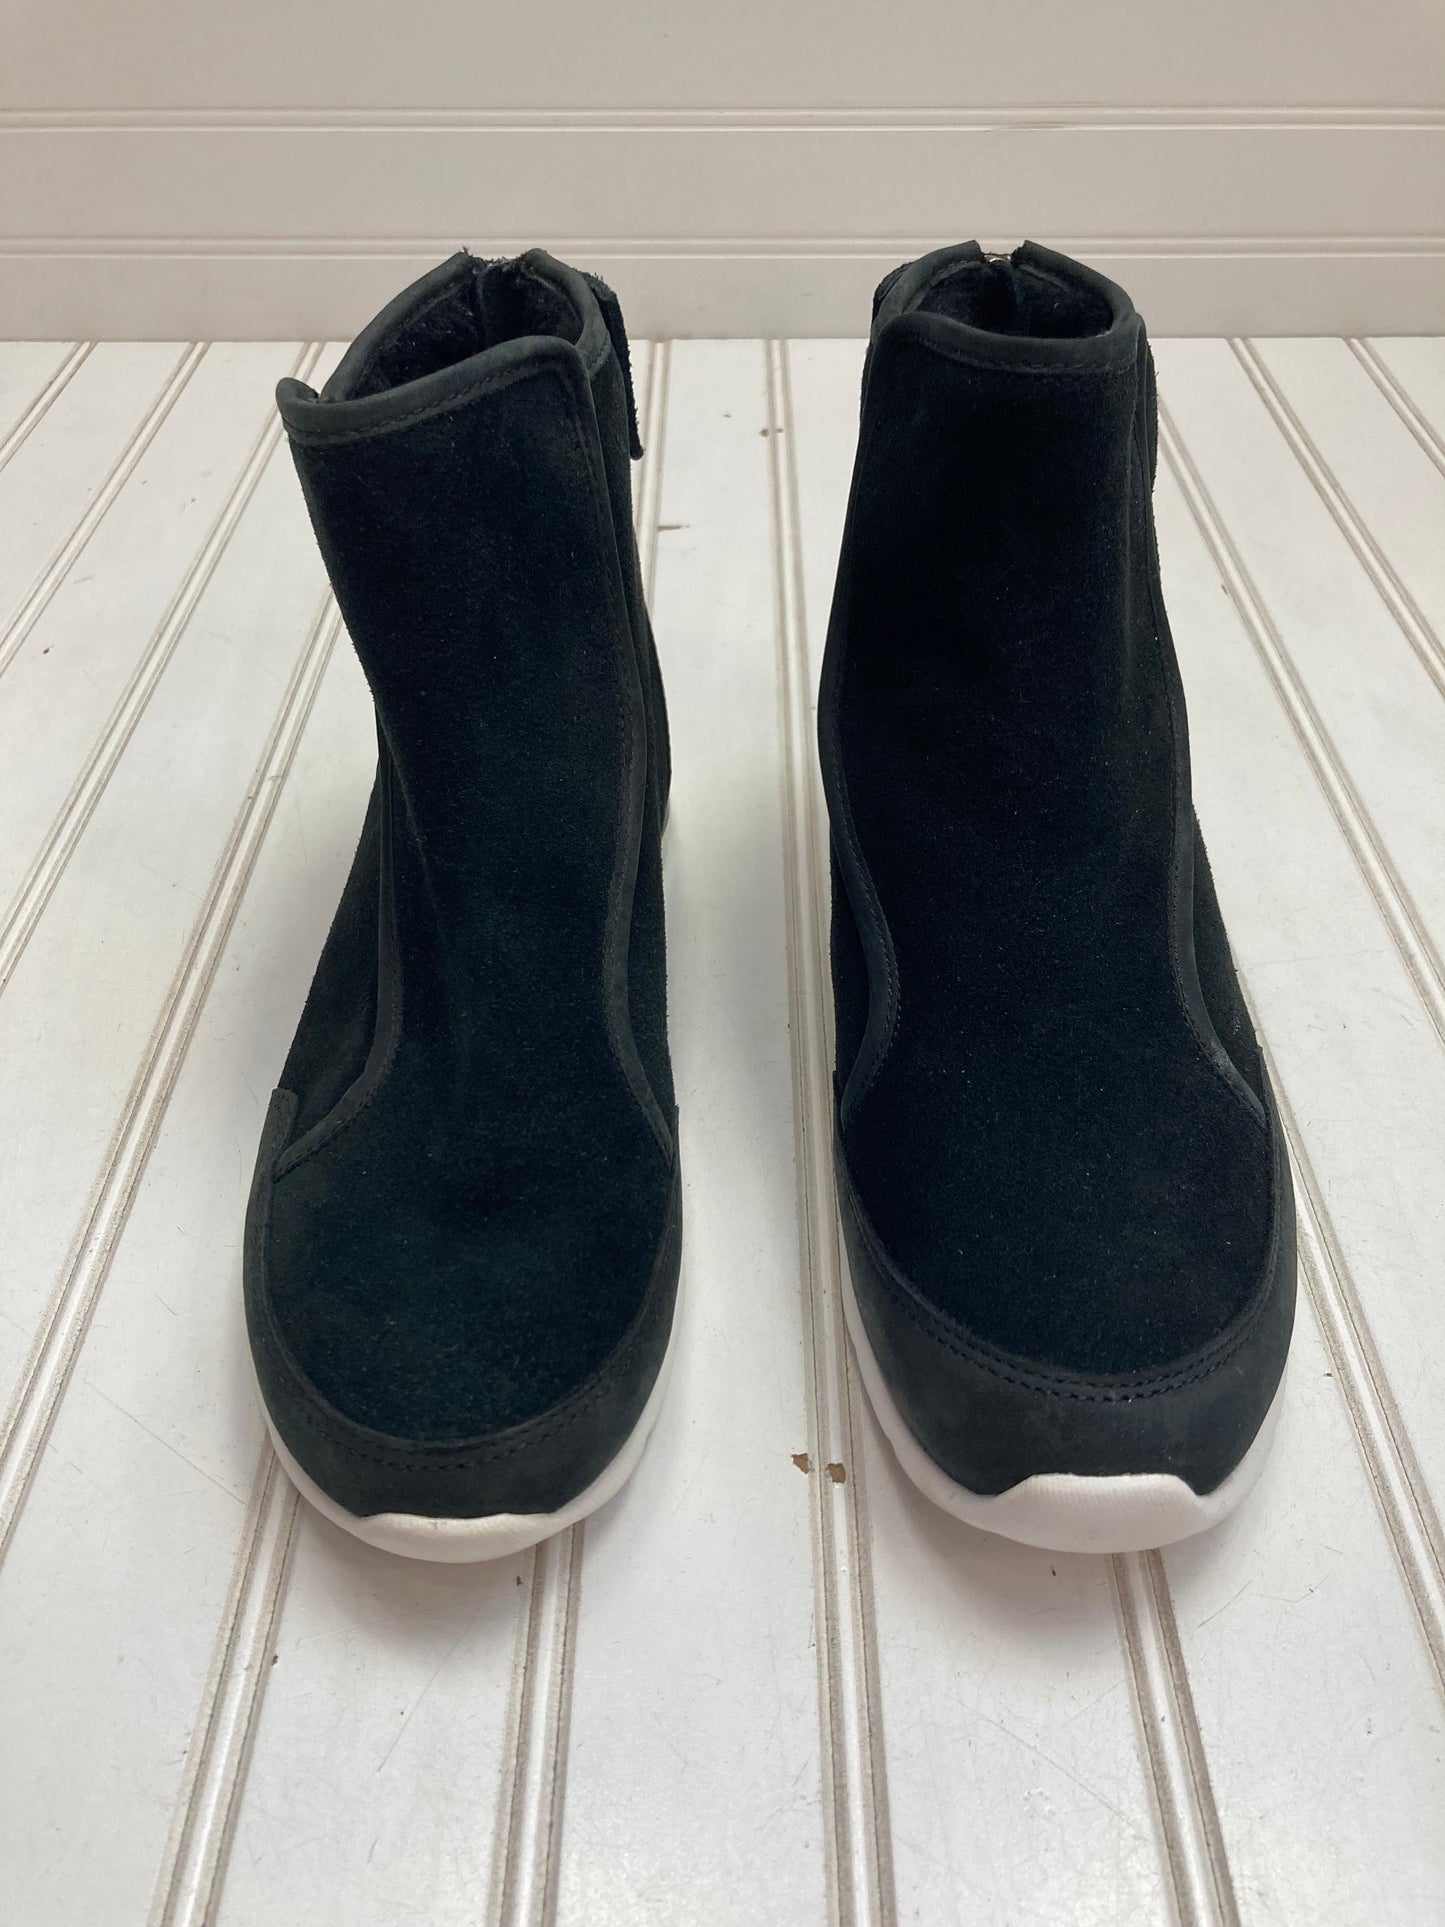 Black Boots Ankle Flats Ugg, Size 7